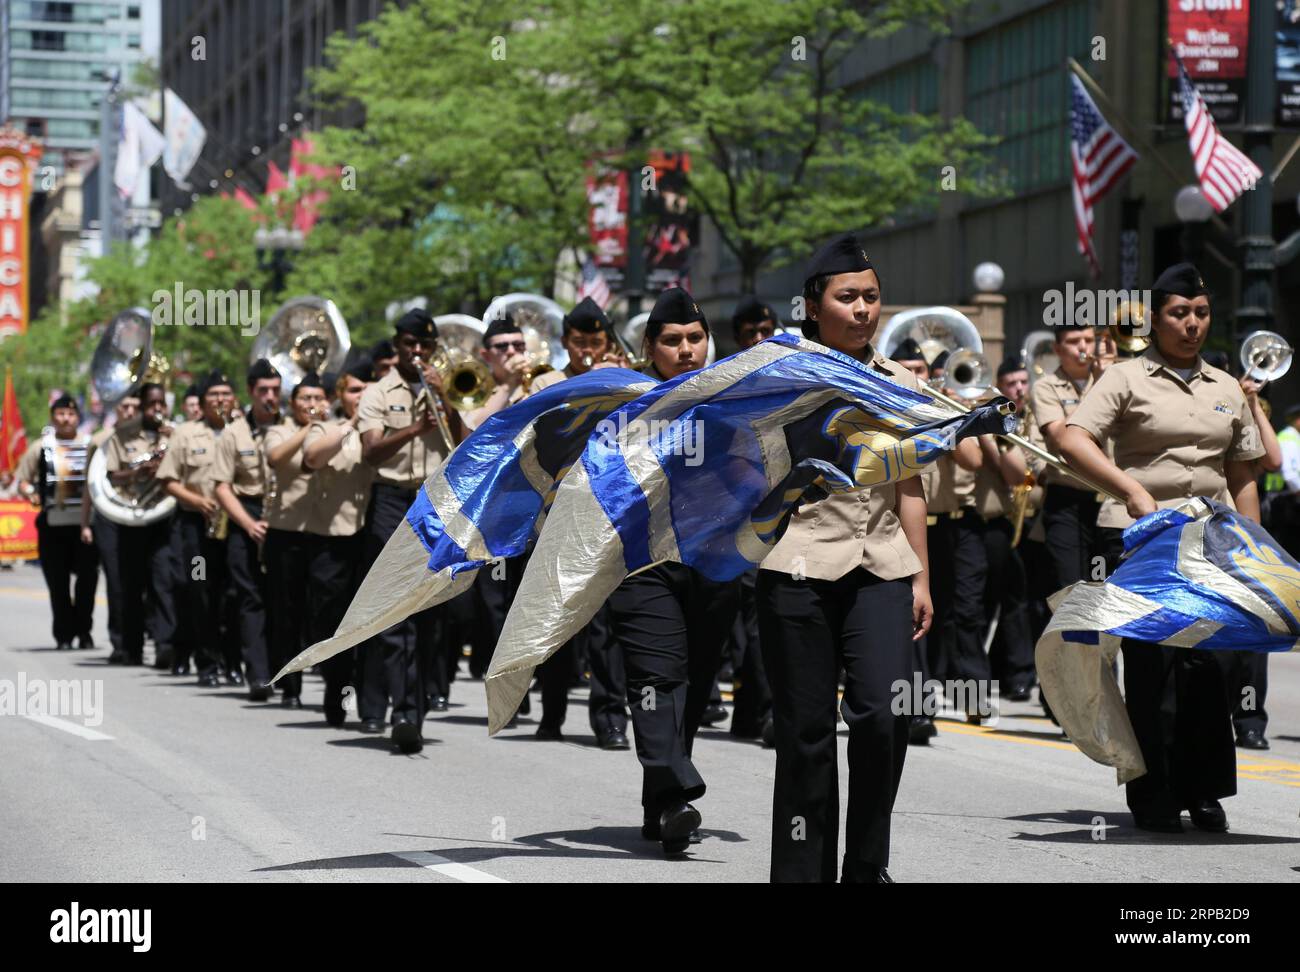 (190525) -- CHICAGO, May 25, 2019 (Xinhua) -- Participants take part in the Memorial Day Parade in Chicago, the United States, on May 25, 2019. The Memorial Day is a federal holiday in the United States for remembering people who have died while serving in the country s armed forces. (Xinhua/Wang Qiang) U.S.-CHICAGO-MEMORIAL DAY-PARADE PUBLICATIONxNOTxINxCHN Stock Photo